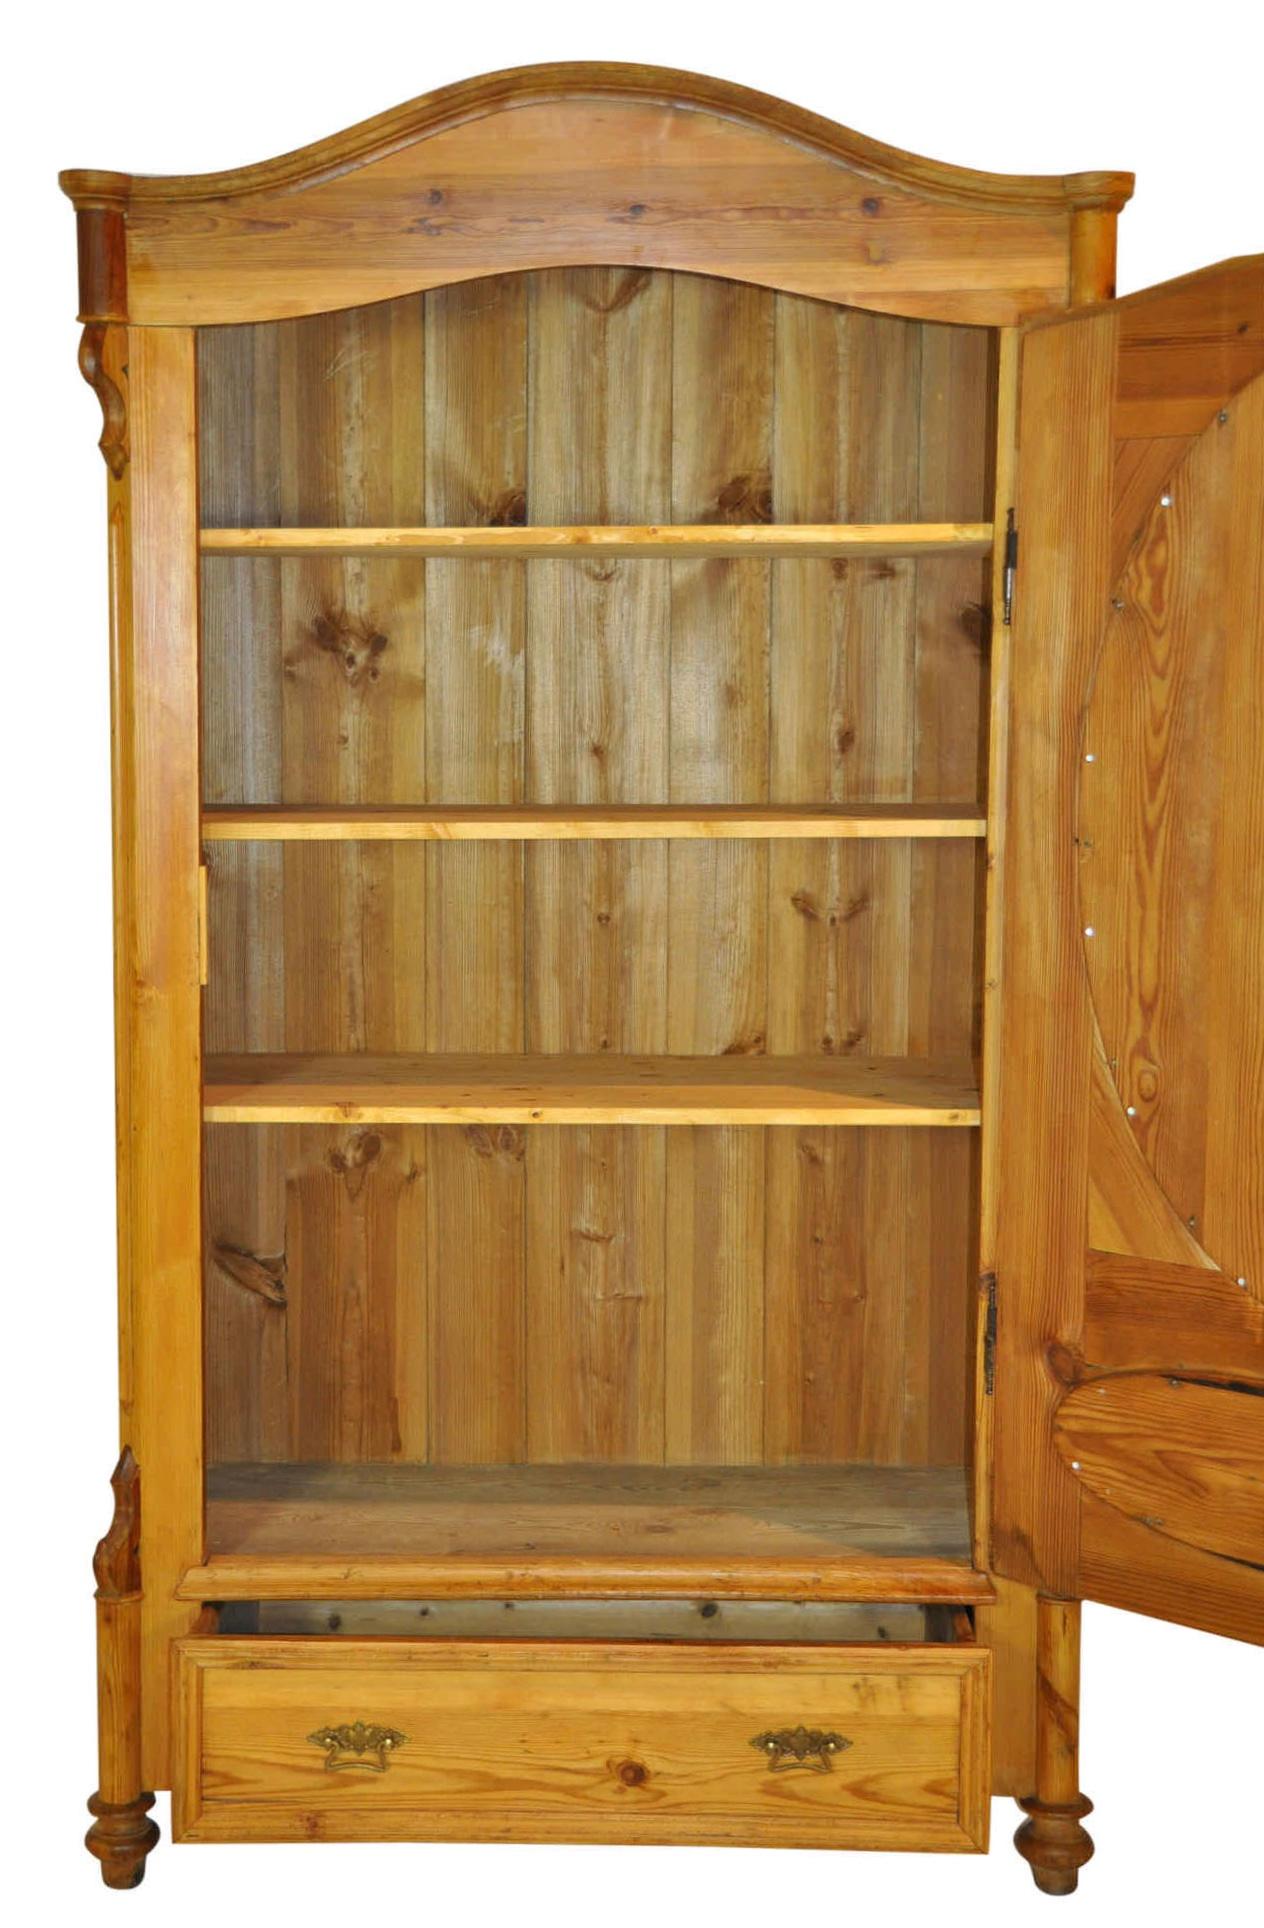 The soft lines of ovals and aches are featured in this pine armoire with its bonnet top and arched door with recessed ovals. The armoire has three removable shelves and a lower drawer.
   